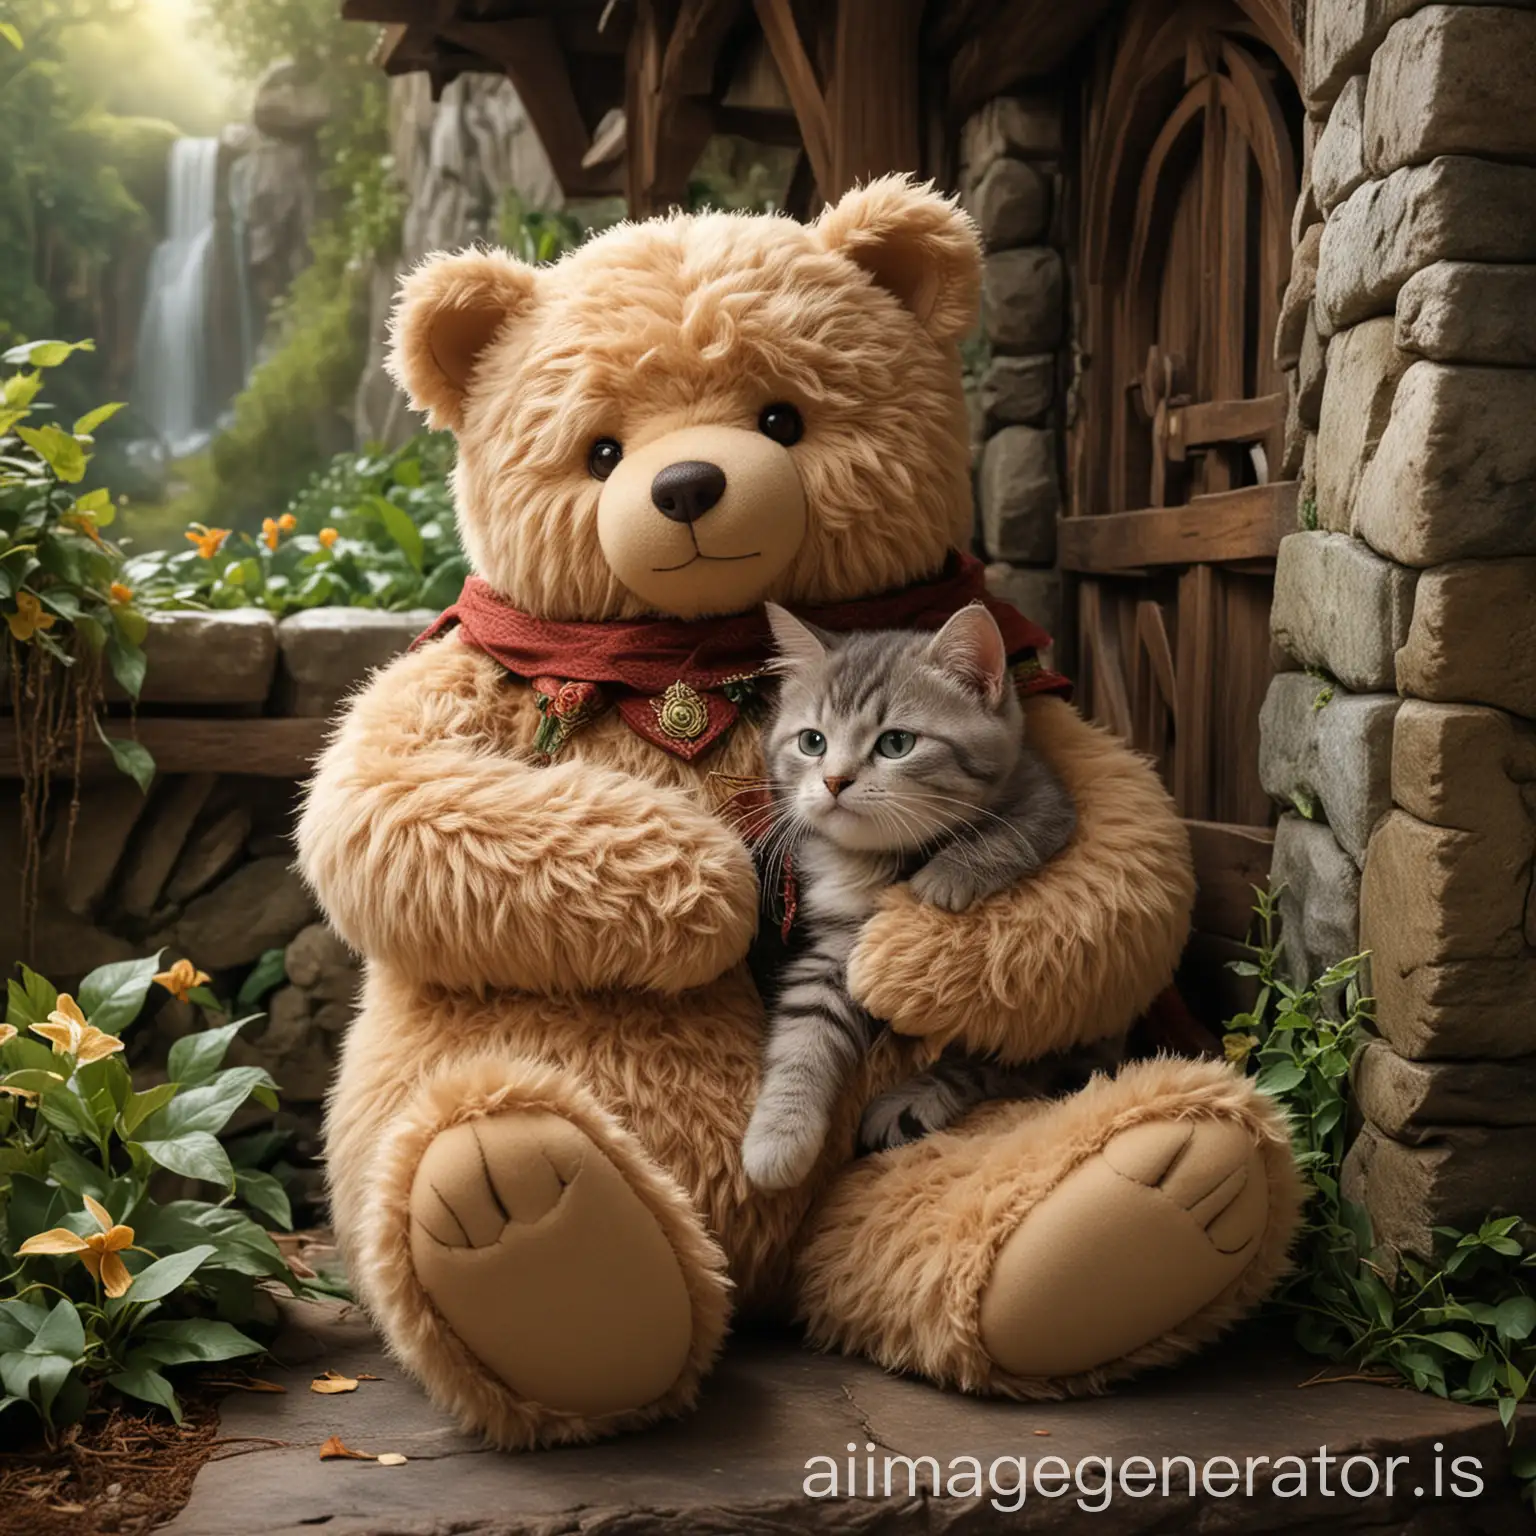 Adorable-Teddy-Bear-and-Cat-Cuddling-in-Enchanting-Rivendell